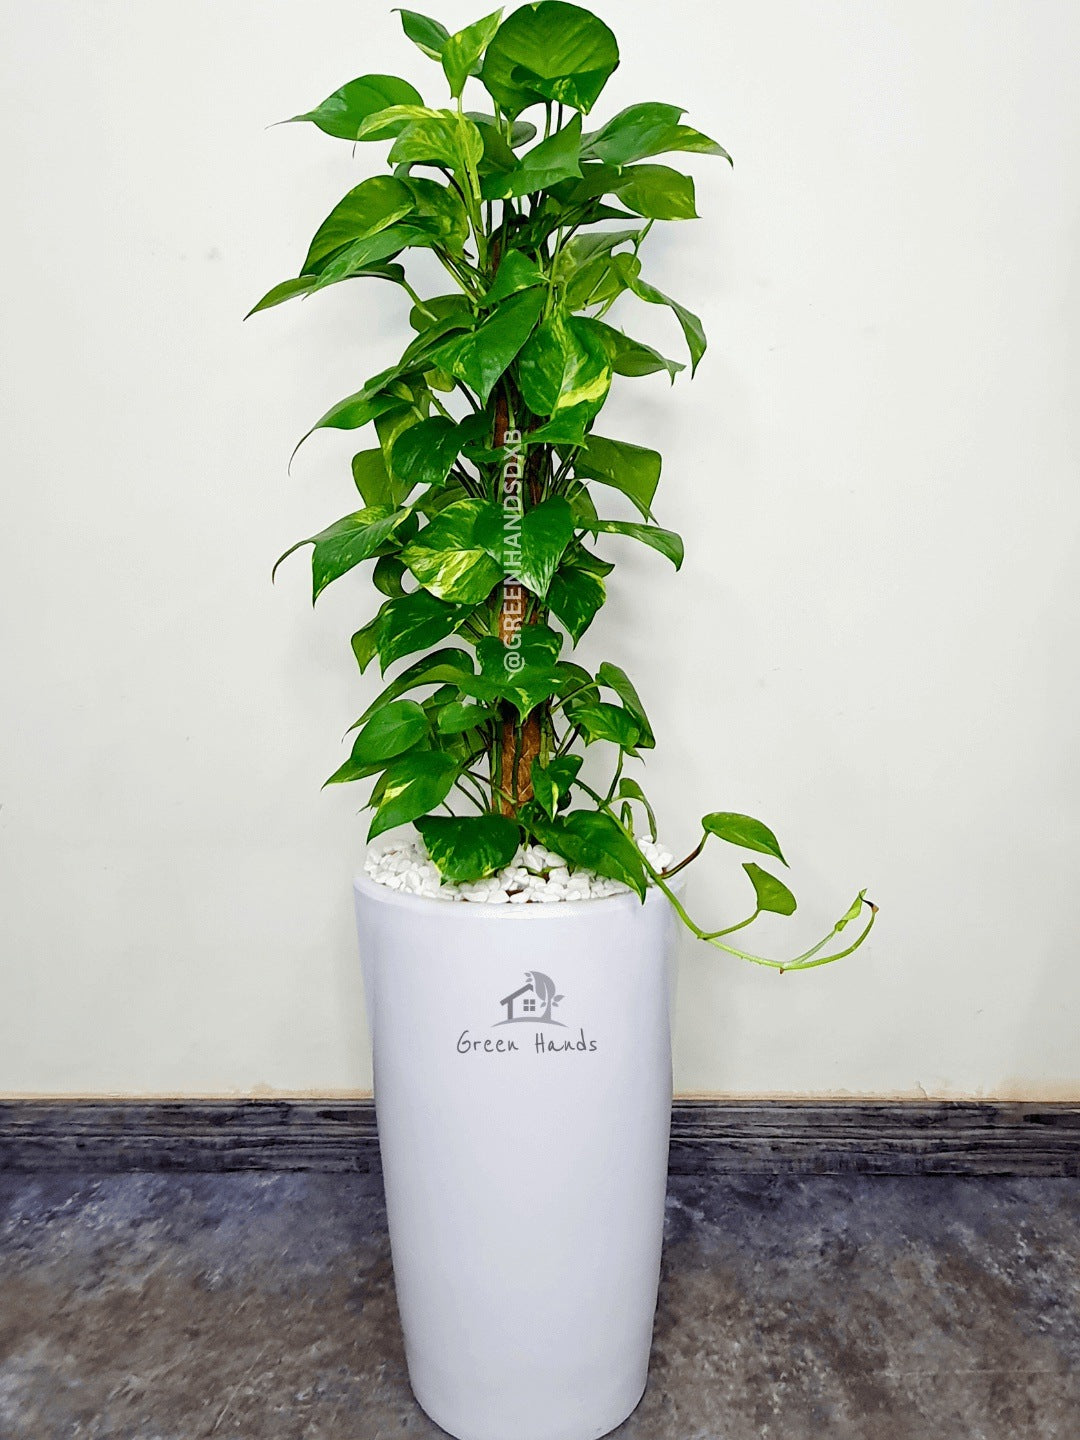 Potted XL Money Plant Planted in White Pot